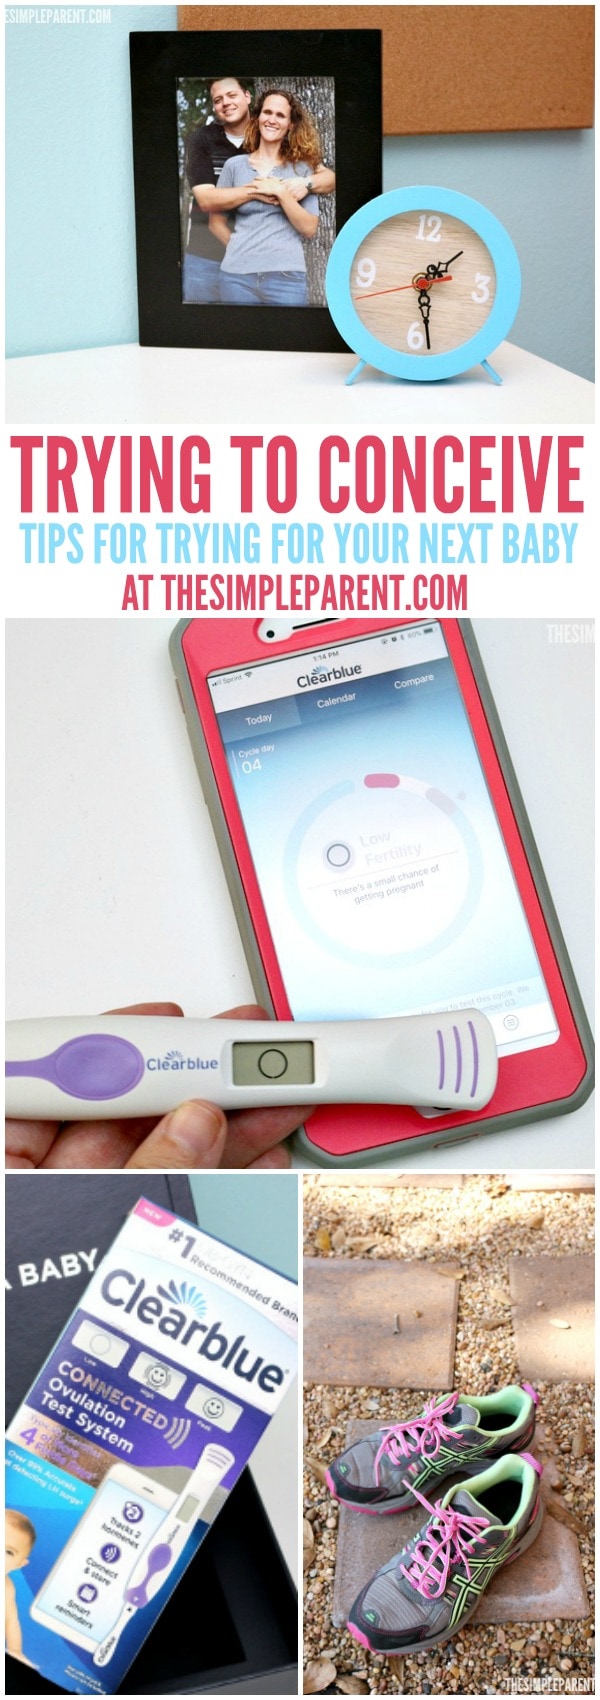 Trying To Conceive Tips - If you're thinking about having another baby while balancing your current family life, these simple trying to conceive tips may help! The first tip is probably my favorite!